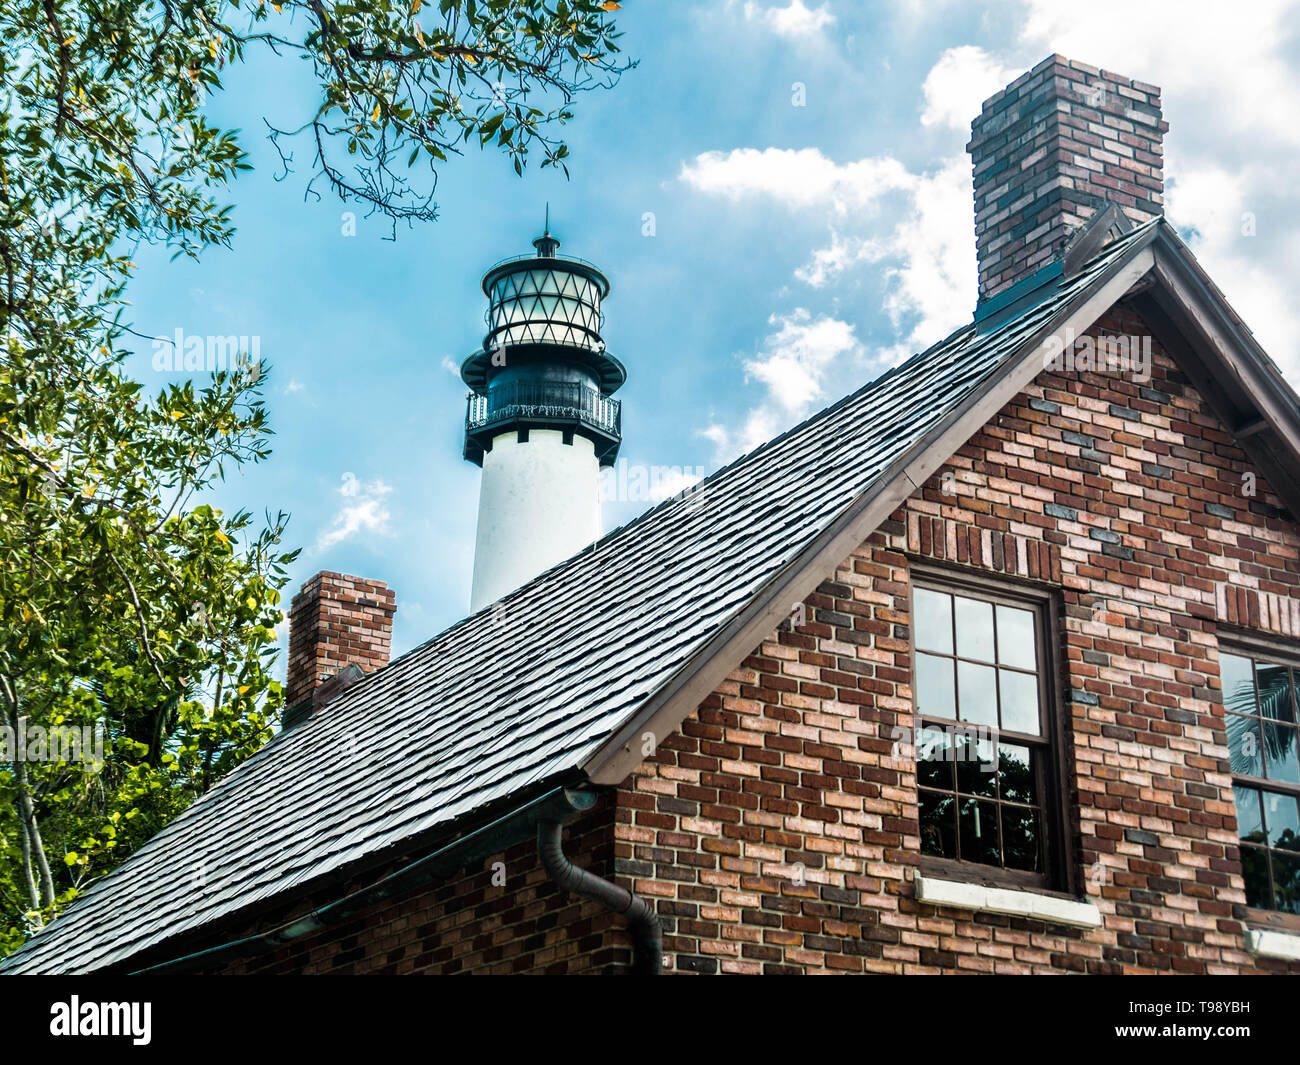 Cape Florida Lighthouse and Keeper's Cottage. Banque D'Images